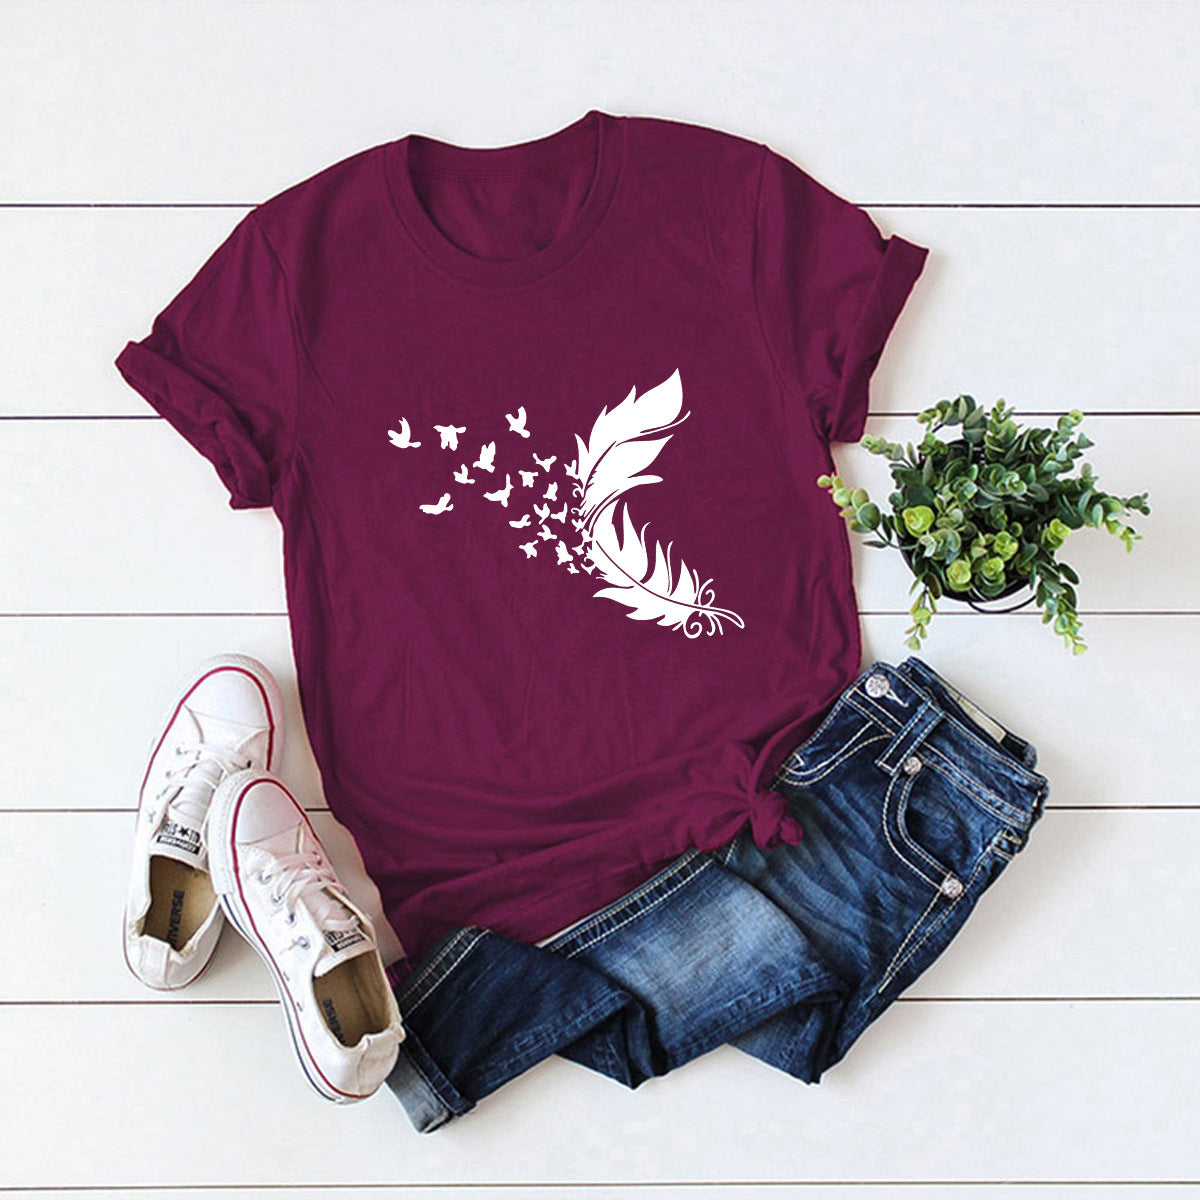 Buy Online Premimum Quality, Trendy and Highly Comfortable Summer Plus Size Women Clothing New Feather Print T-Shirt - FEYONAS